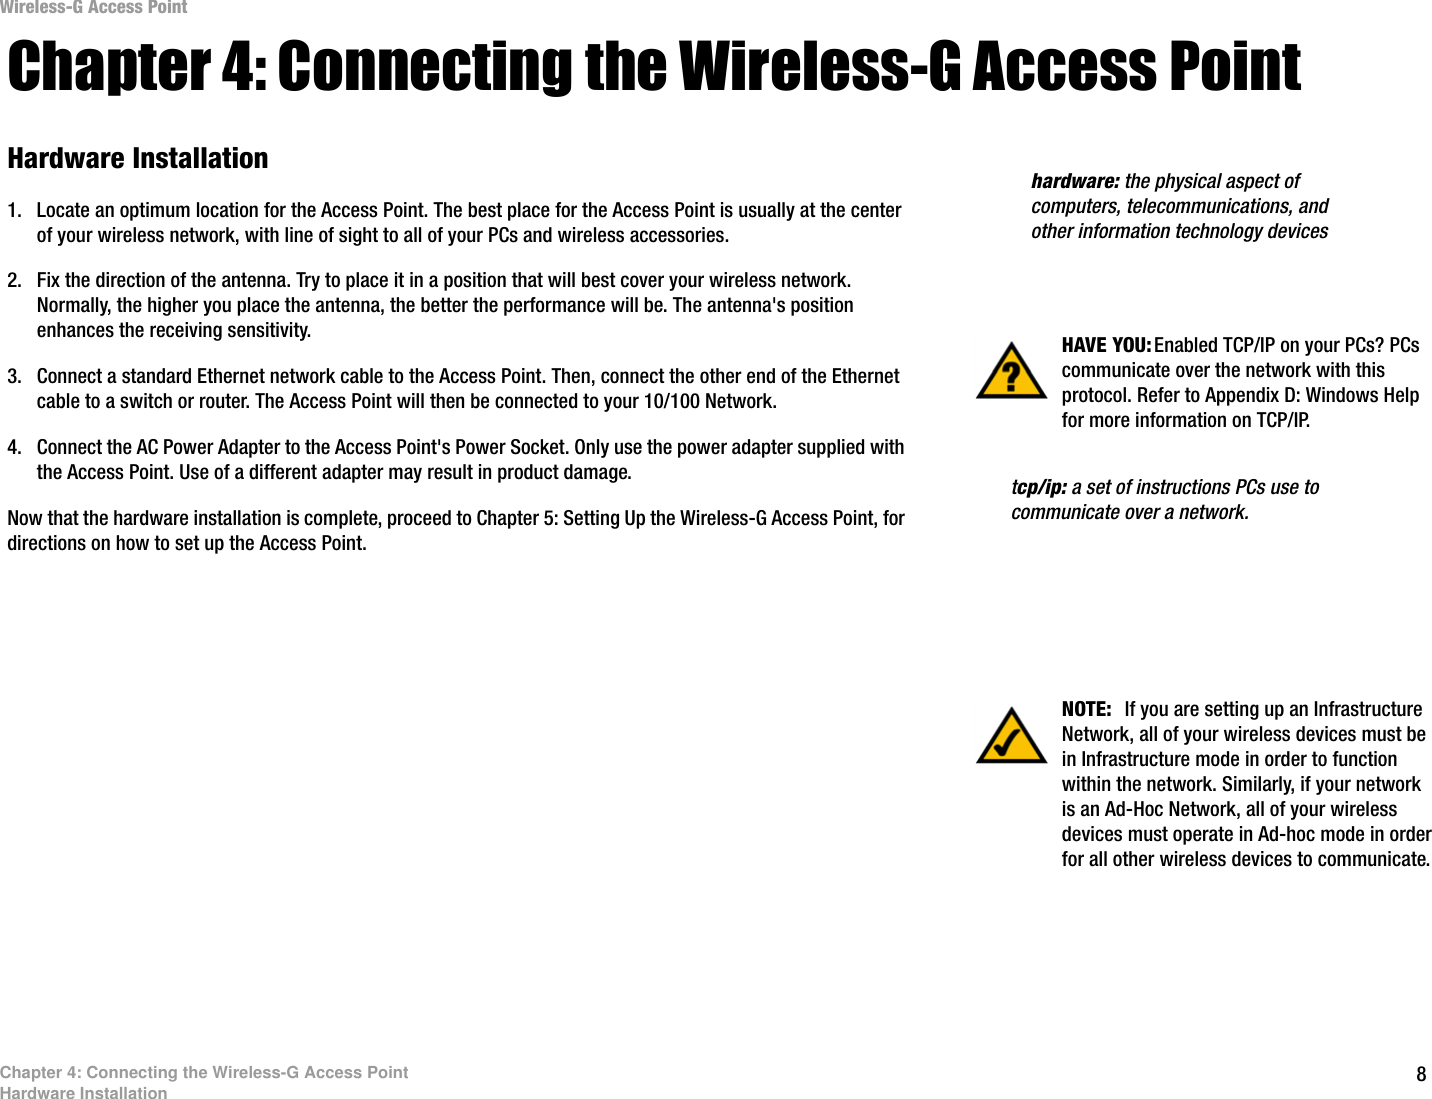 8Chapter 4: Connecting the Wireless-G Access PointHardware InstallationWireless-G Access PointChapter 4: Connecting the Wireless-G Access PointHardware Installation1. Locate an optimum location for the Access Point. The best place for the Access Point is usually at the center of your wireless network, with line of sight to all of your PCs and wireless accessories.2. Fix the direction of the antenna. Try to place it in a position that will best cover your wireless network. Normally, the higher you place the antenna, the better the performance will be. The antenna&apos;s position enhances the receiving sensitivity.3. Connect a standard Ethernet network cable to the Access Point. Then, connect the other end of the Ethernet cable to a switch or router. The Access Point will then be connected to your 10/100 Network.4. Connect the AC Power Adapter to the Access Point&apos;s Power Socket. Only use the power adapter supplied with the Access Point. Use of a different adapter may result in product damage.Now that the hardware installation is complete, proceed to Chapter 5: Setting Up the Wireless-G Access Point, for directions on how to set up the Access Point. tcp/ip: a set of instructions PCs use to communicate over a network.HAVE YOU:Enabled TCP/IP on your PCs? PCs communicate over the network with this protocol. Refer to Appendix D: Windows Help for more information on TCP/IP.hardware: the physical aspect of computers, telecommunications, and other information technology devicesNOTE:  If you are setting up an Infrastructure Network, all of your wireless devices must be in Infrastructure mode in order to function within the network. Similarly, if your network is an Ad-Hoc Network, all of your wireless devices must operate in Ad-hoc mode in order for all other wireless devices to communicate.